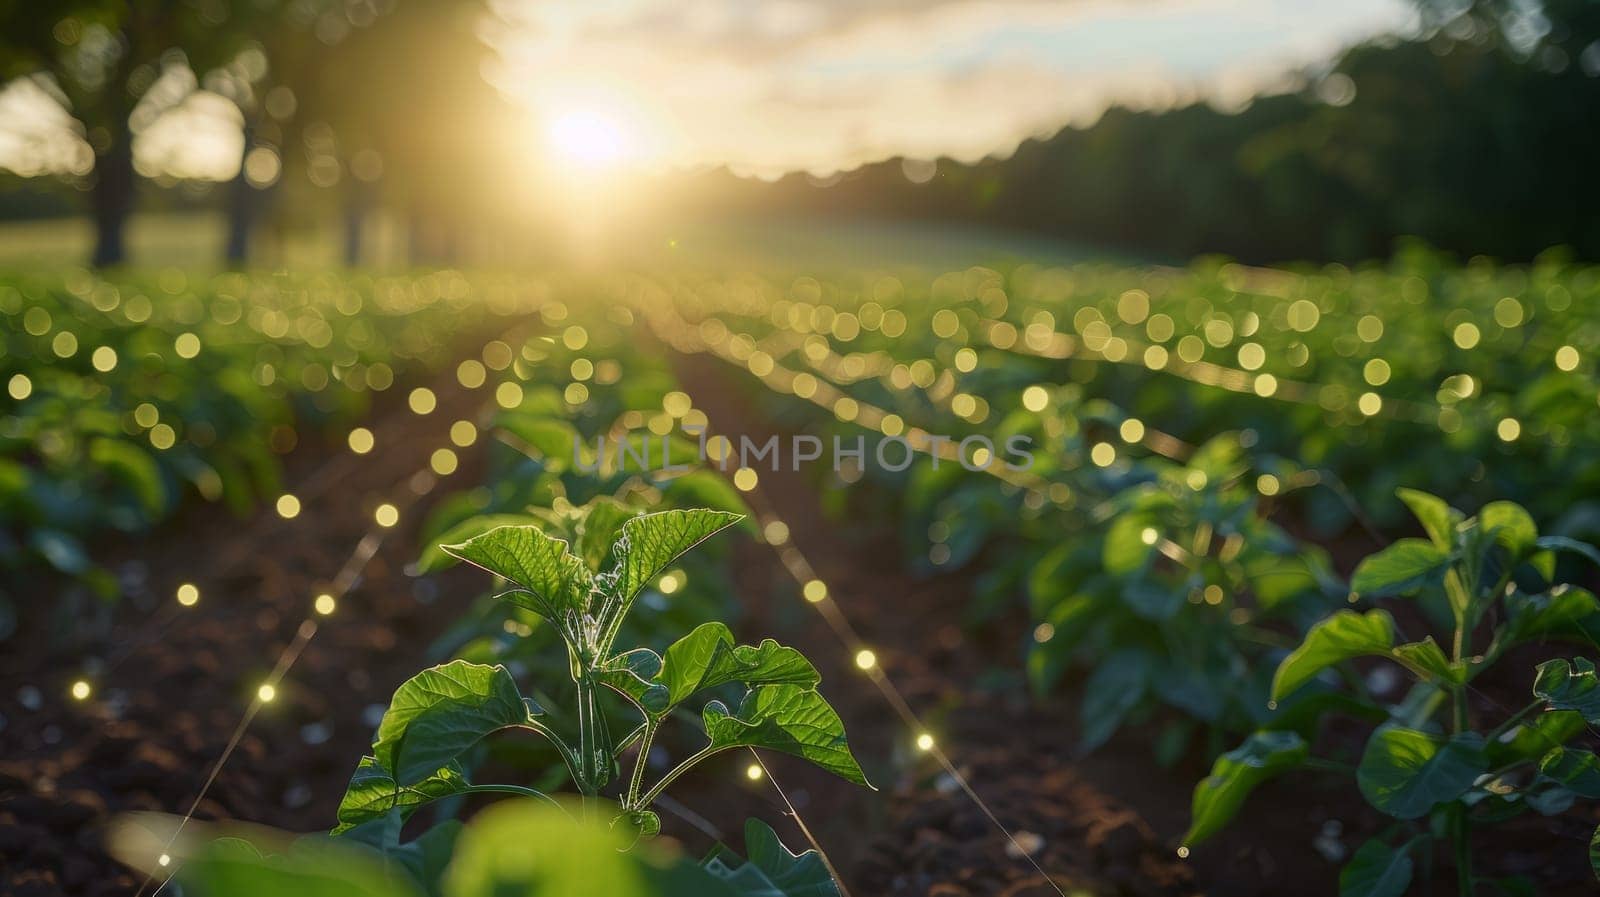 Rows of illuminated potato plants growing in a sustainable farm field at sunset. Concept of agriculture, technology, and innovation